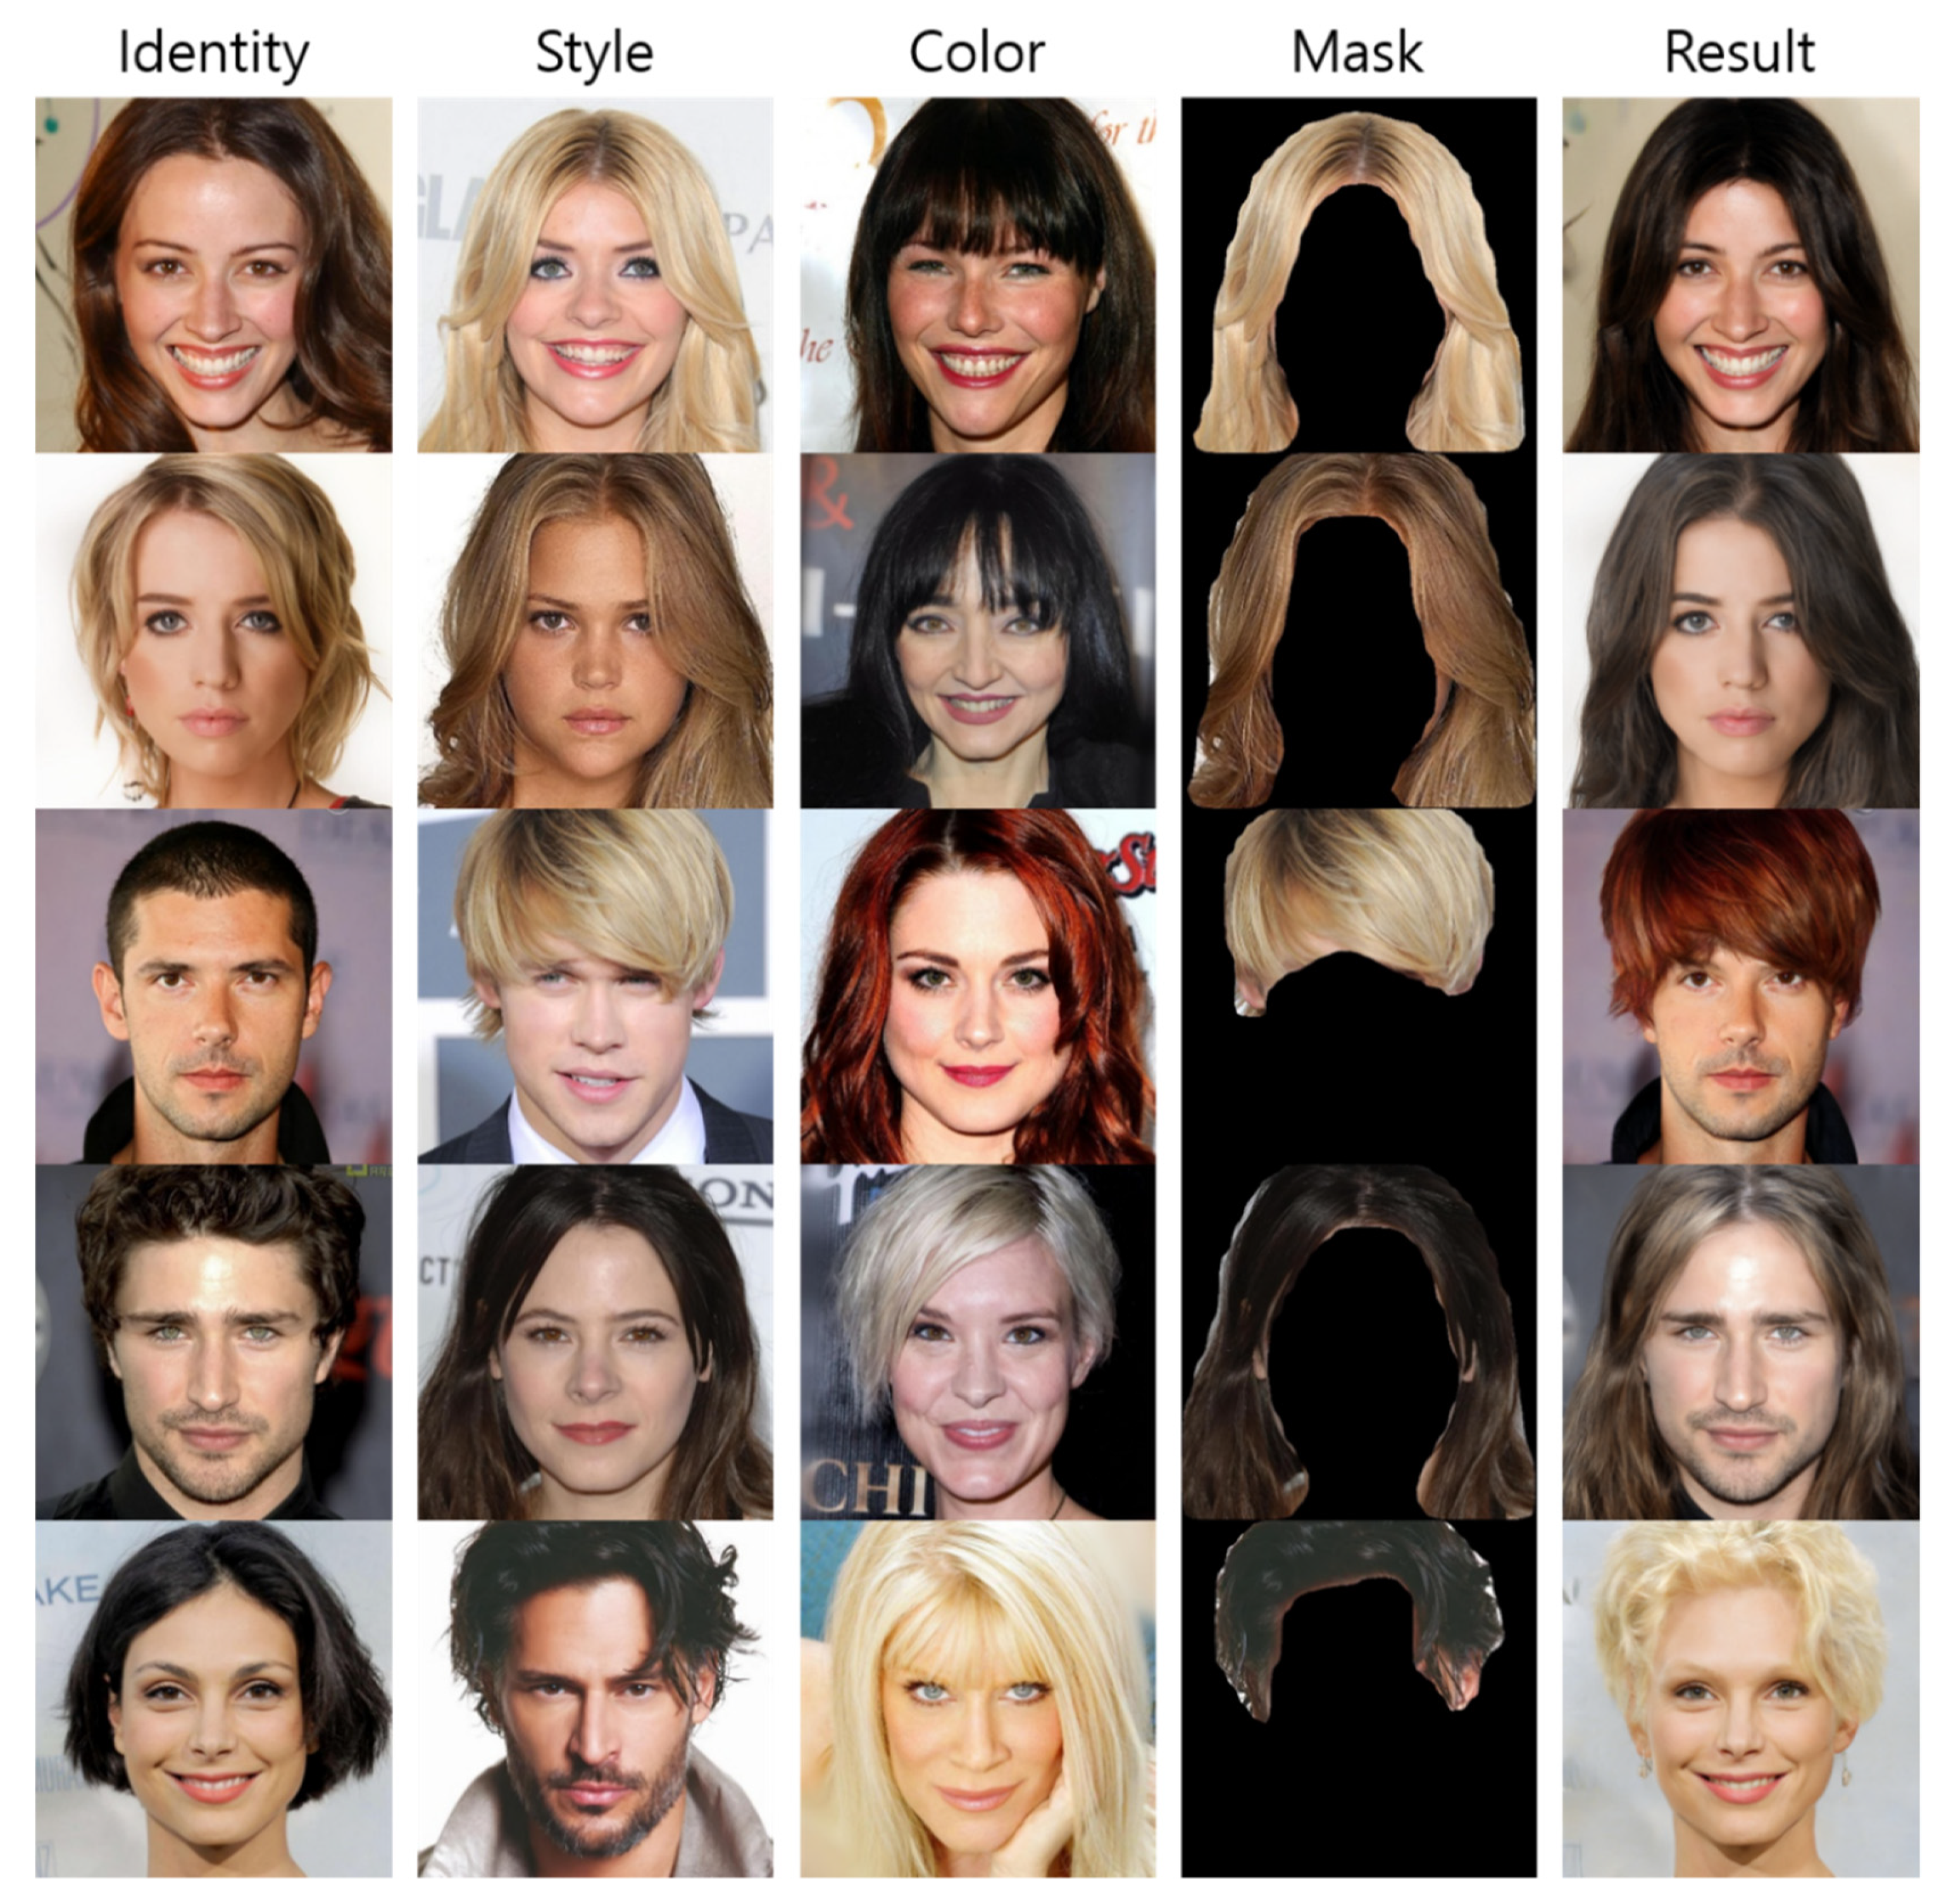 45 Hairstyles for Round Faces - Best Haircuts for Round Face Shape